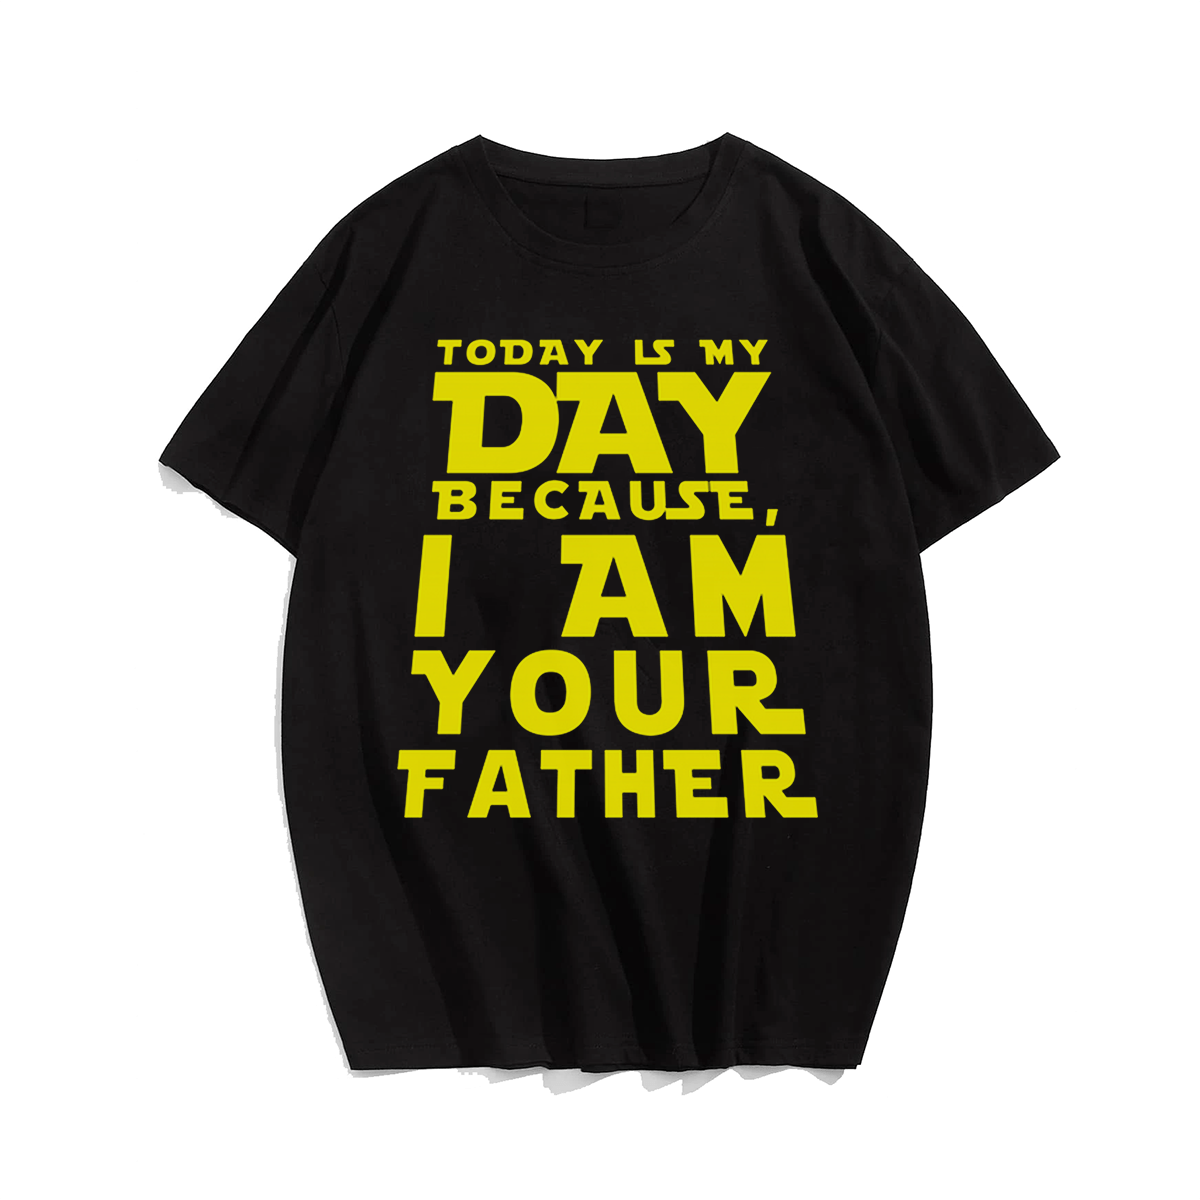 Today Is My Day Because I Am Your Father T-shirt for Men, Oversize Plus Size Big & Tall Man Clothing